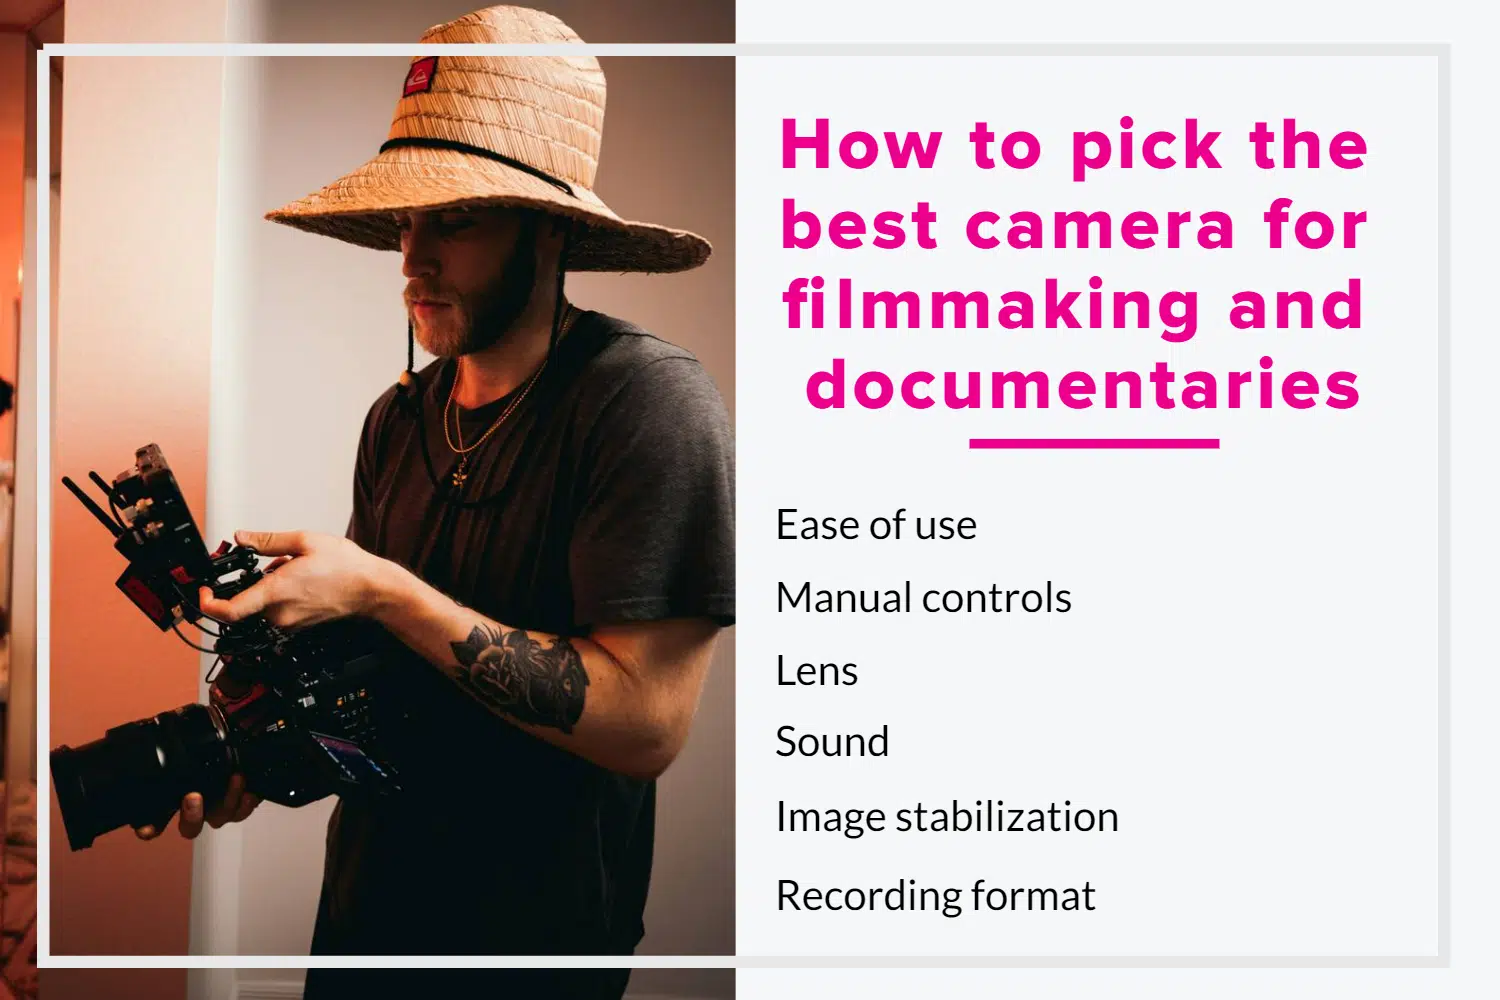 How to pick the best camera for filmmaking and documentaries